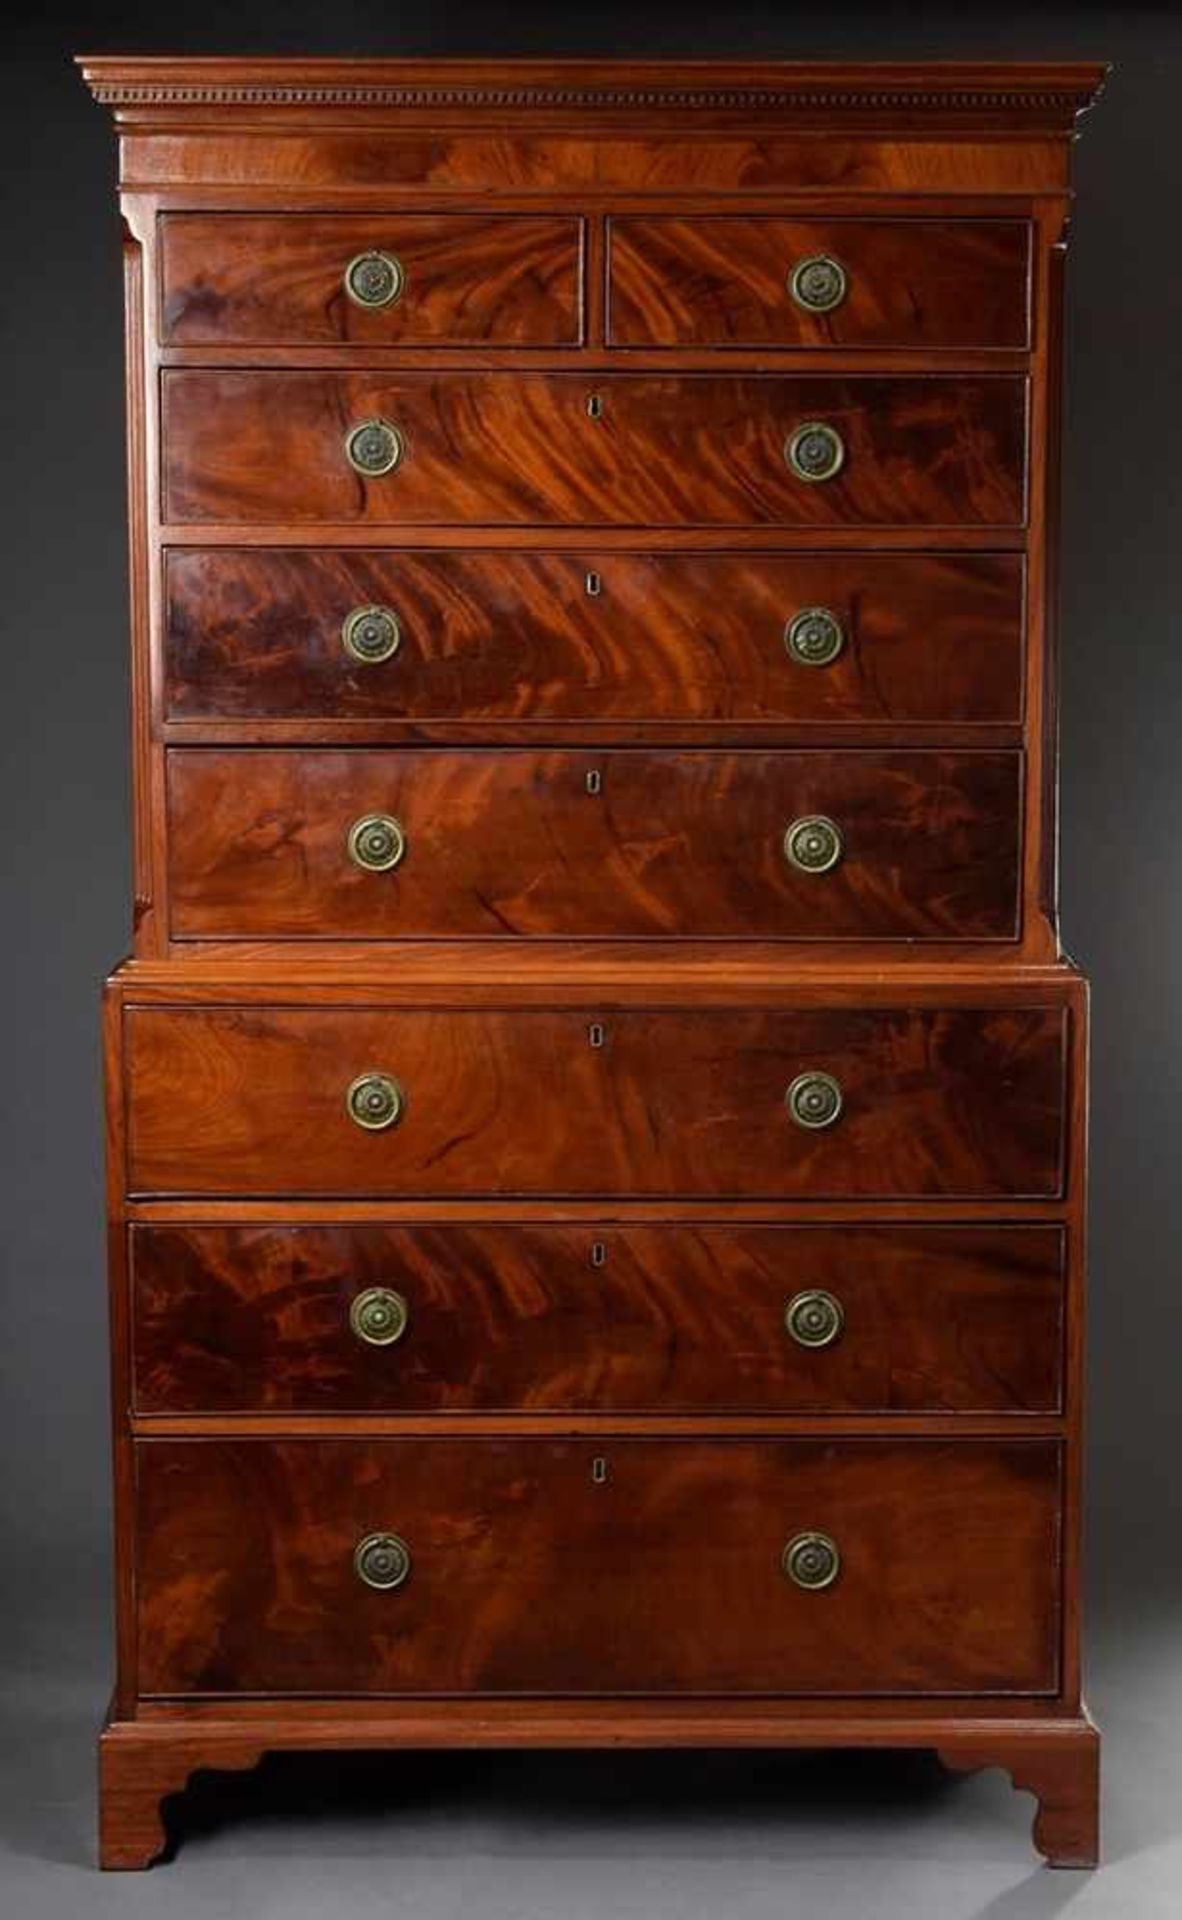 English "Chest-on-chest" chest of drawers so called "Tallboy" in classic façon with delicate calf